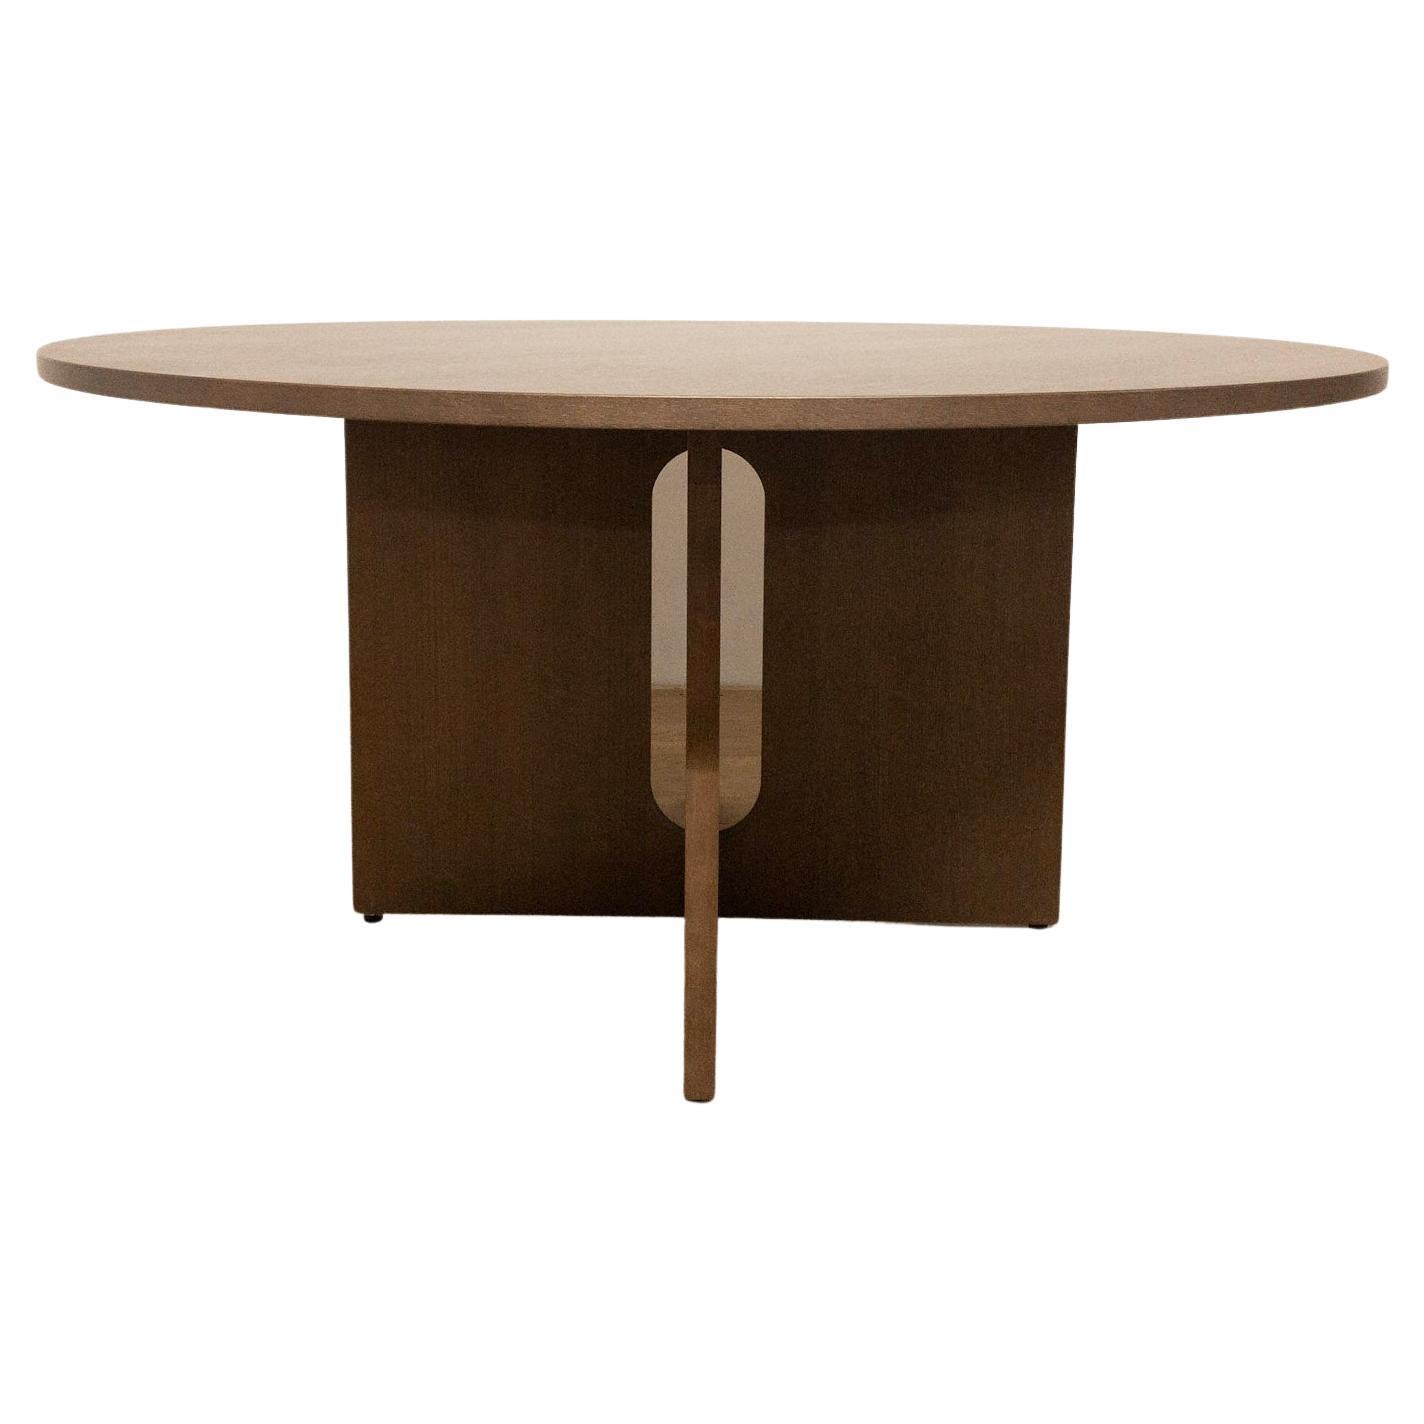 Round Scandinavian Dining Table with Modern Solid Oak Base